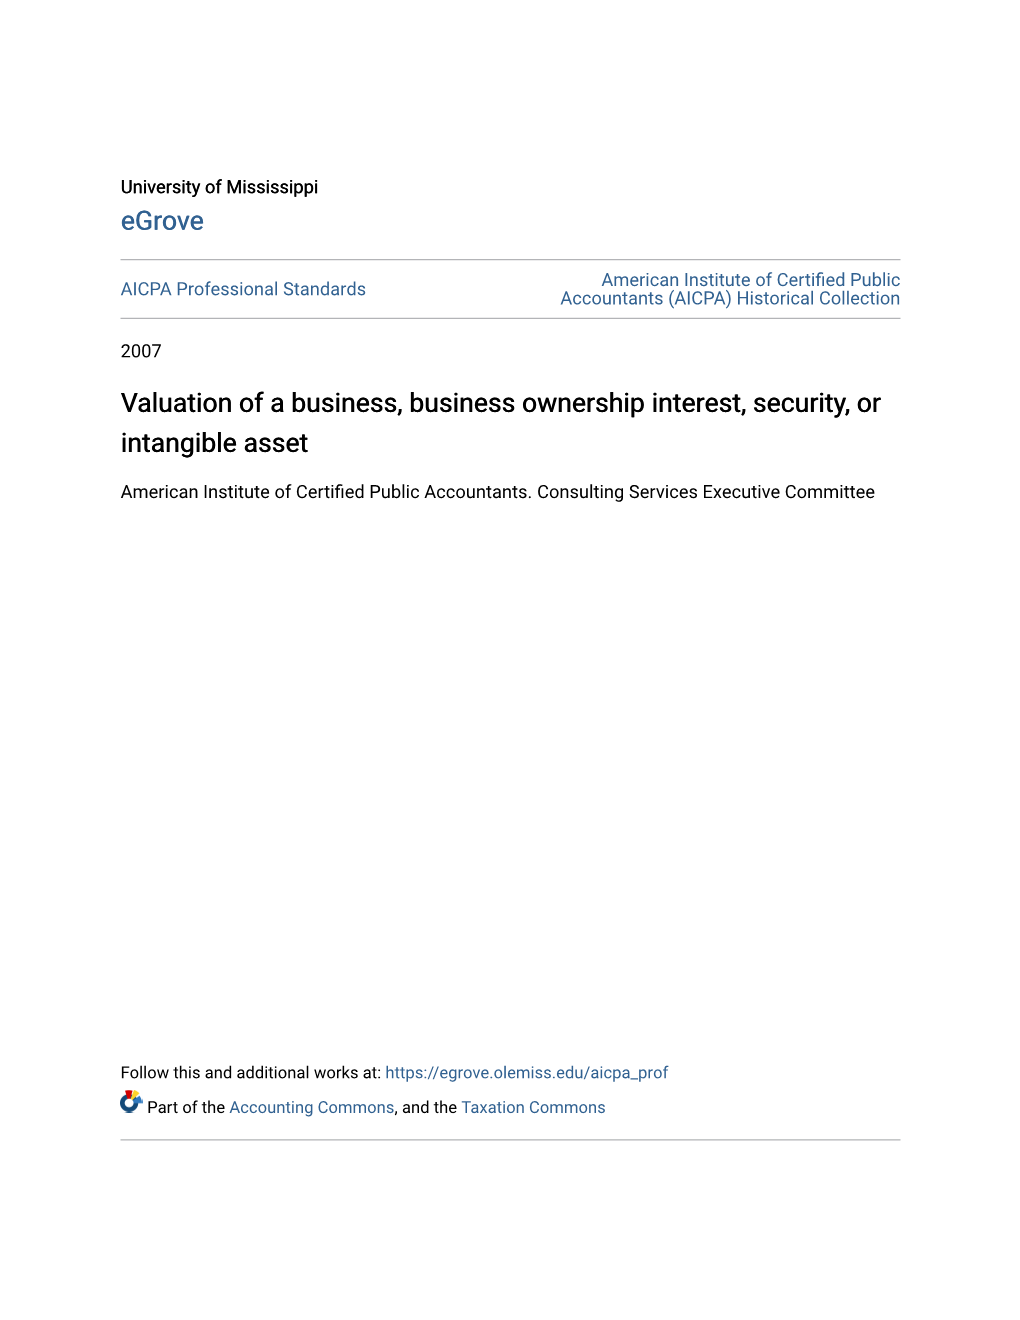 Valuation of a Business, Business Ownership Interest, Security, Or Intangible Asset